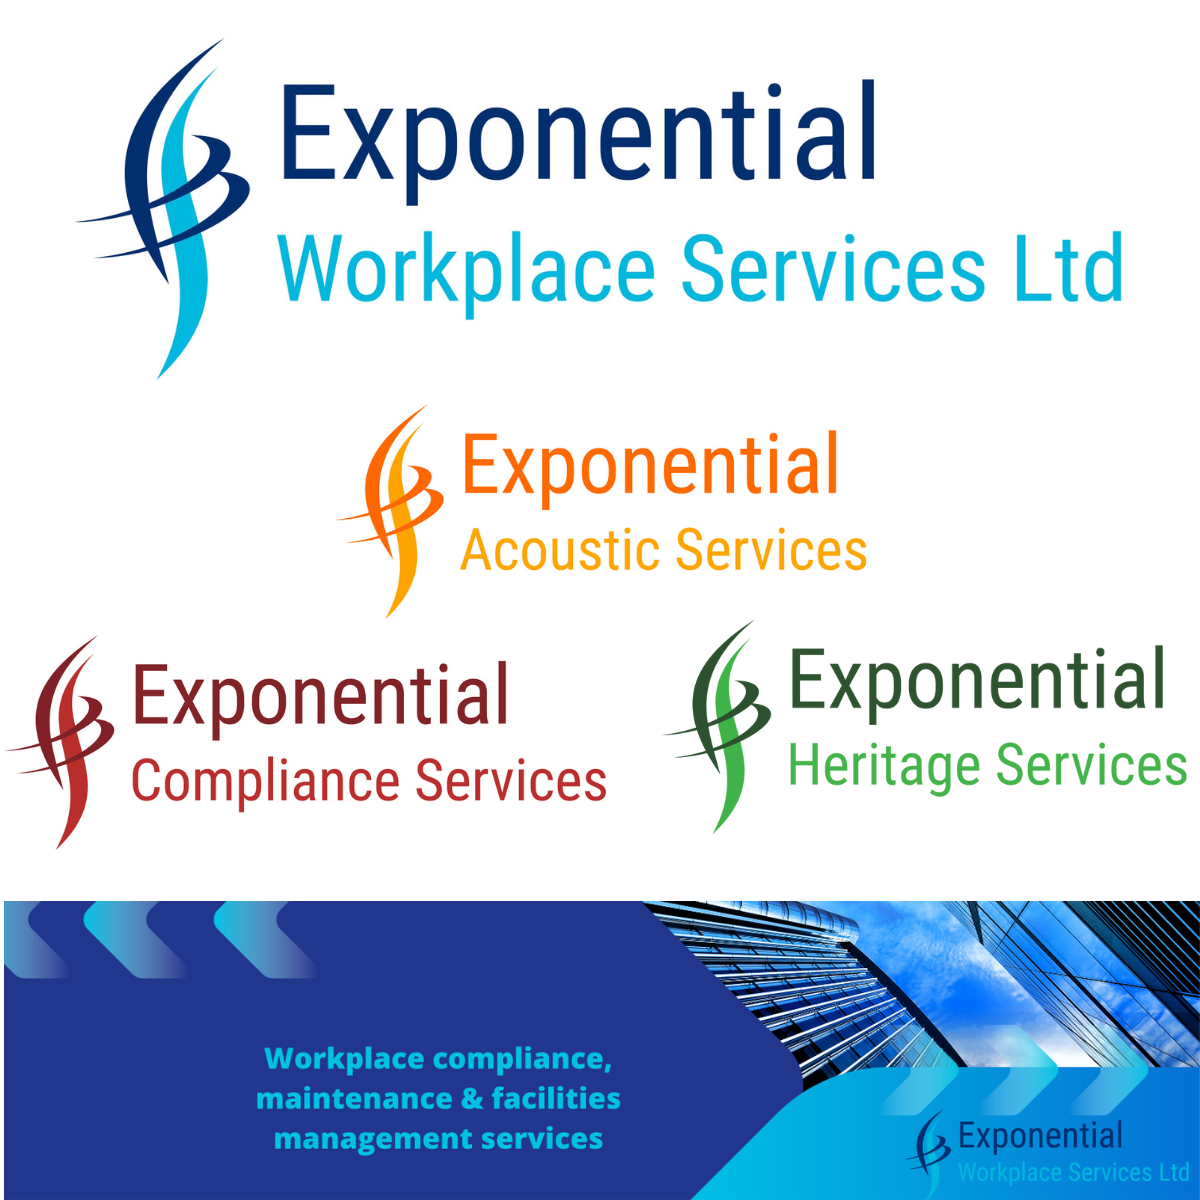 Exponential Workplace Services